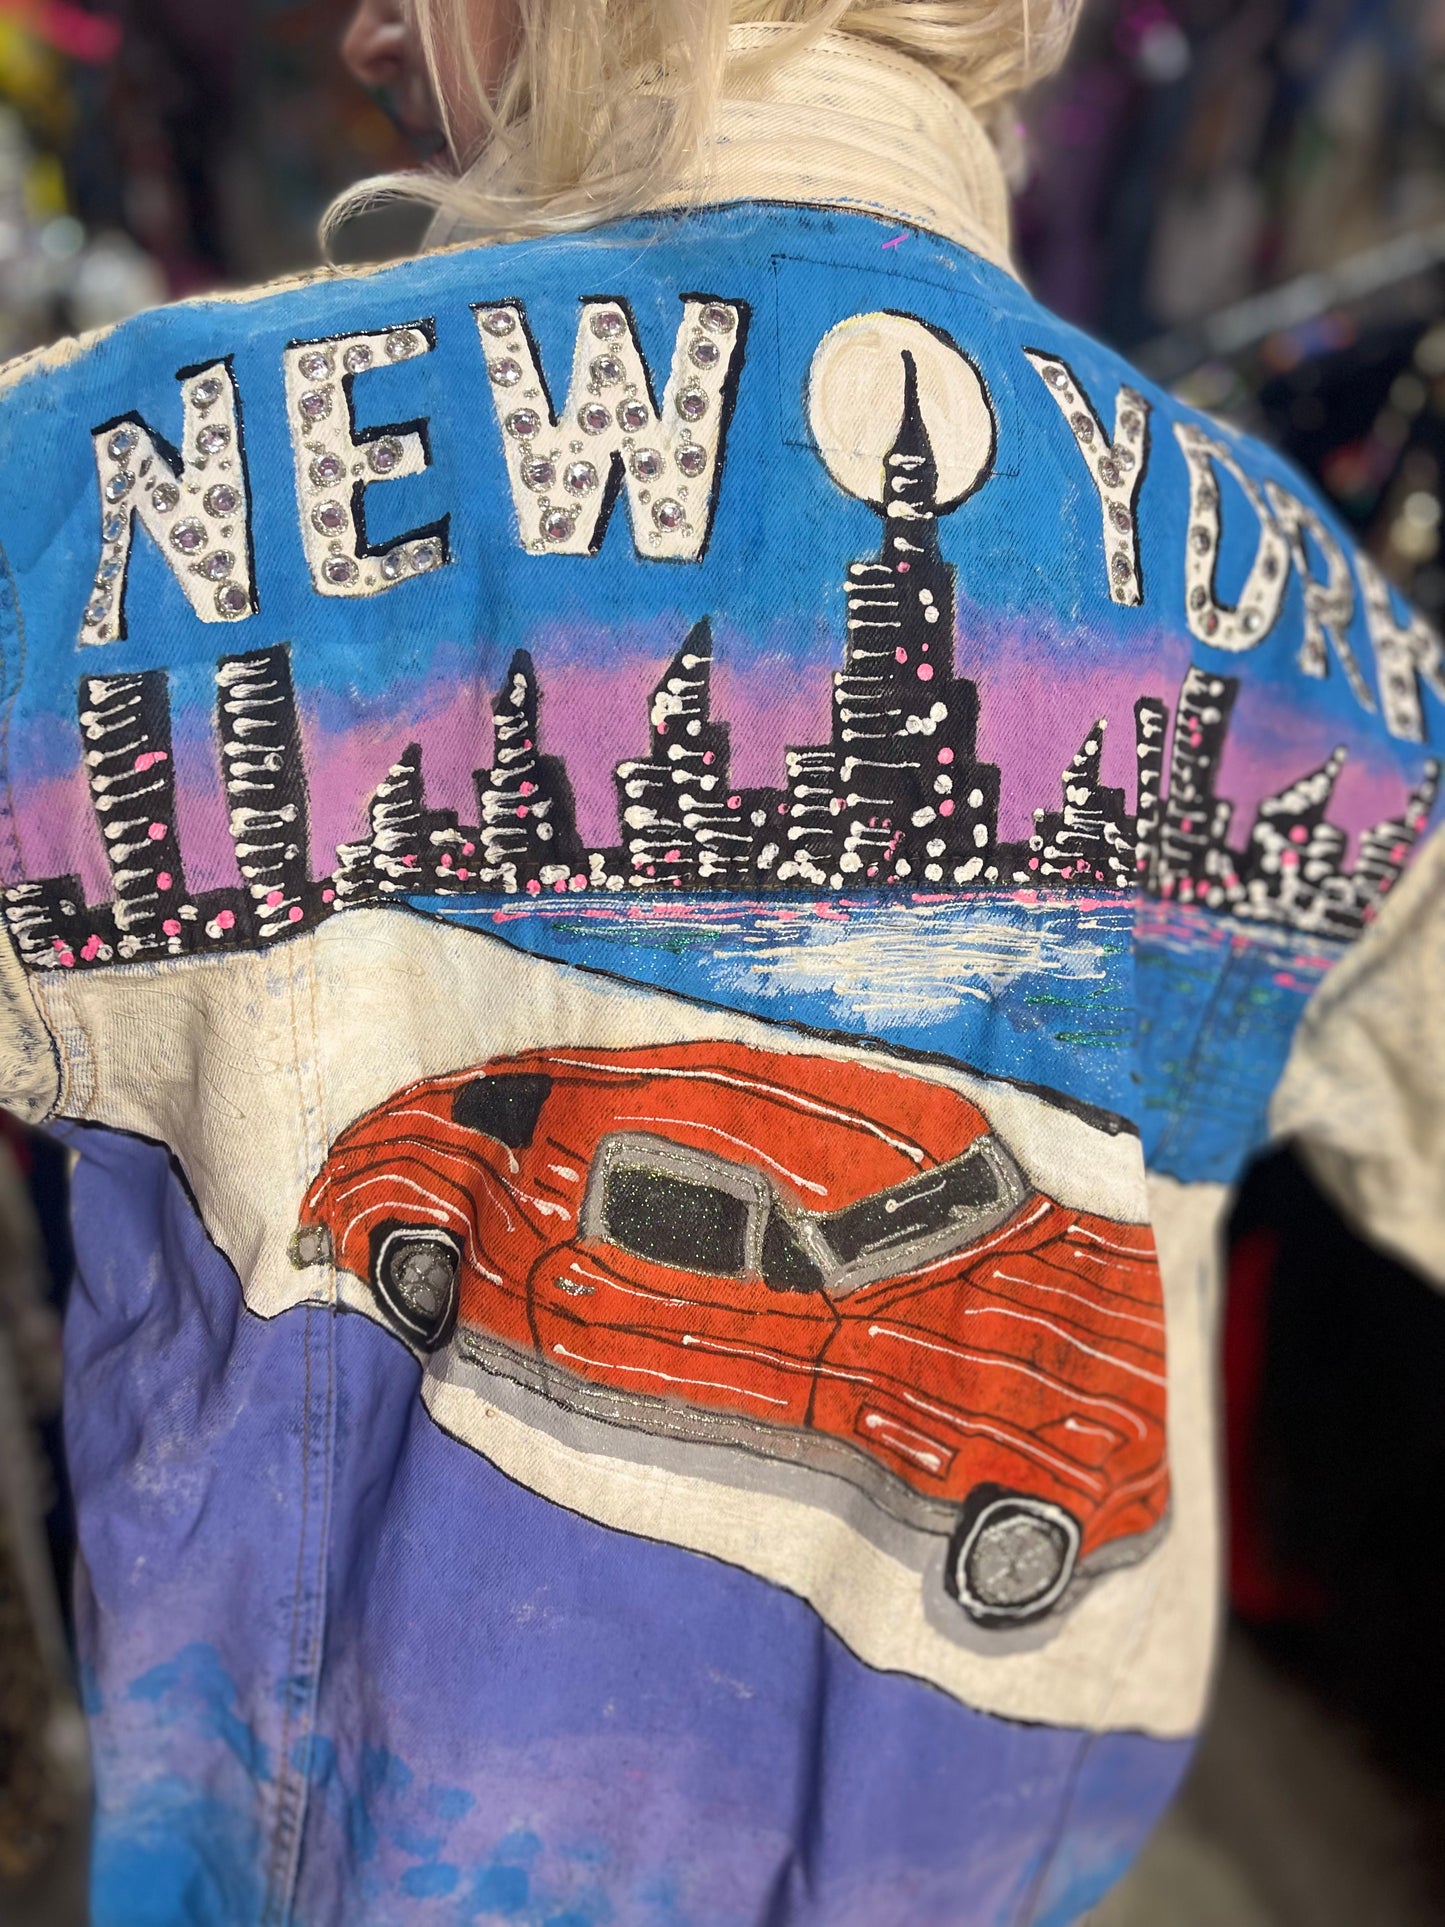 Vintage 80s Painted and Bedazzled New York Jean Jacket